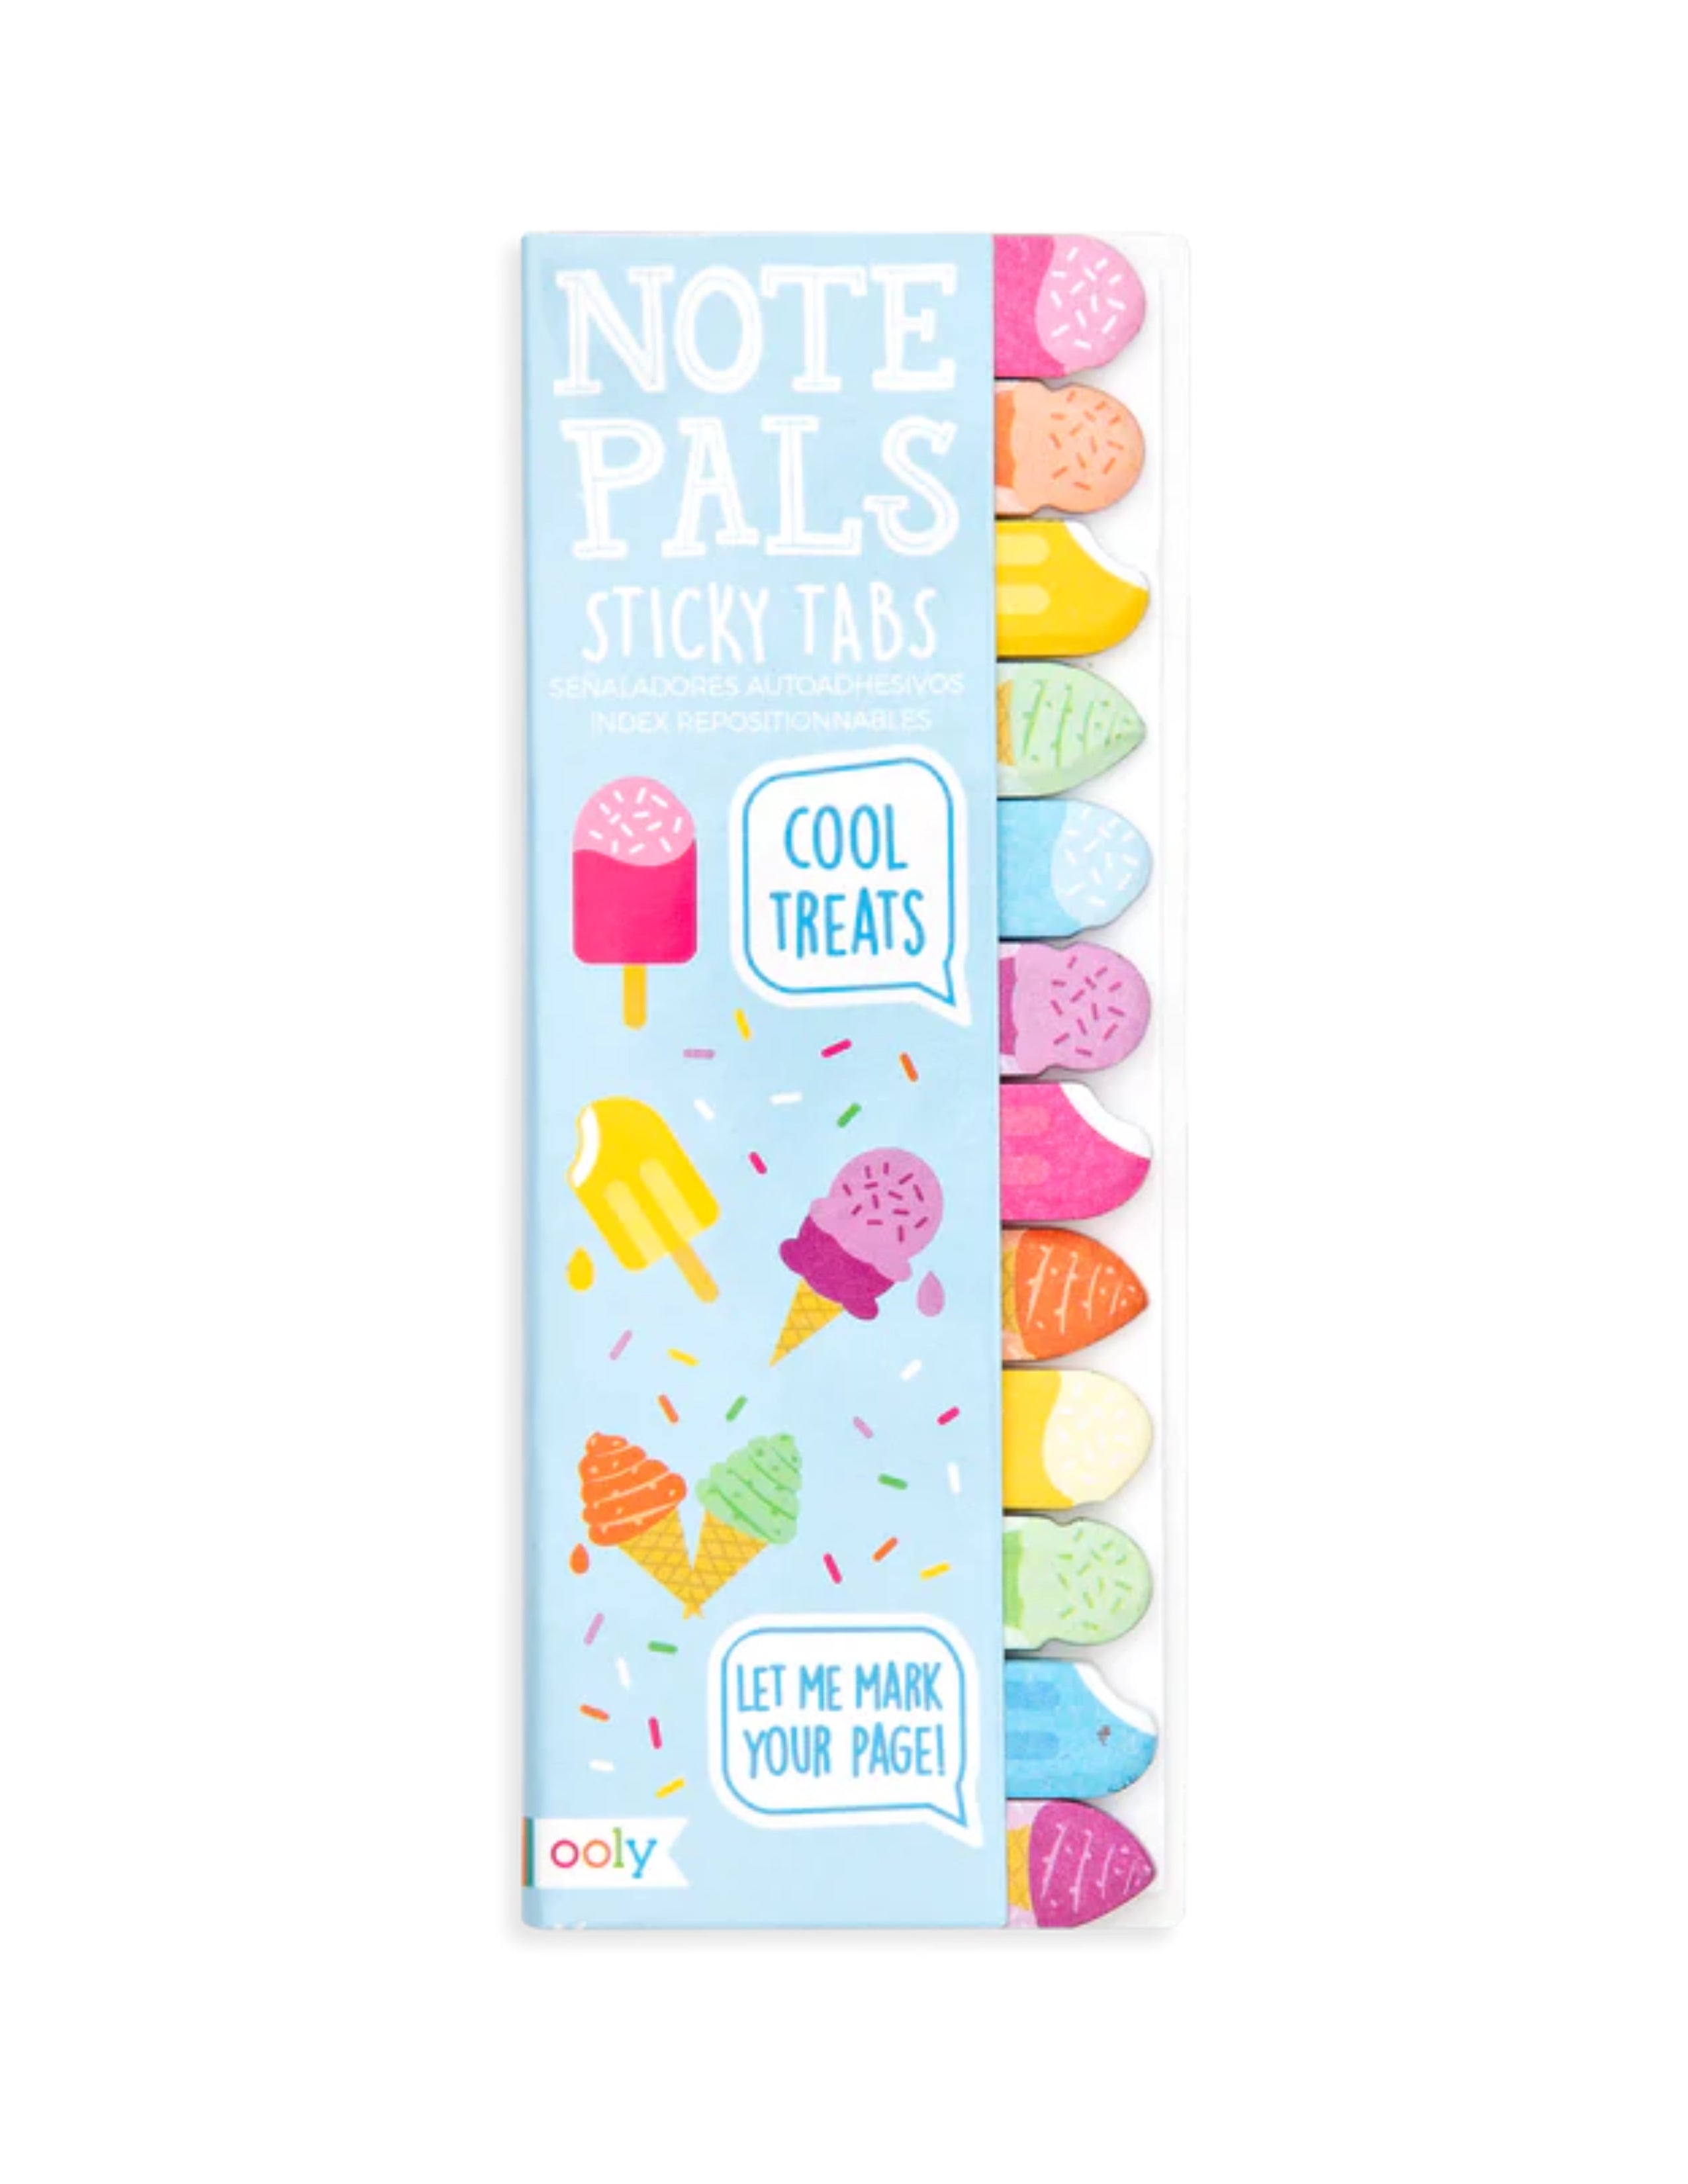 Notepals Sticky Tabs - Cool Treats